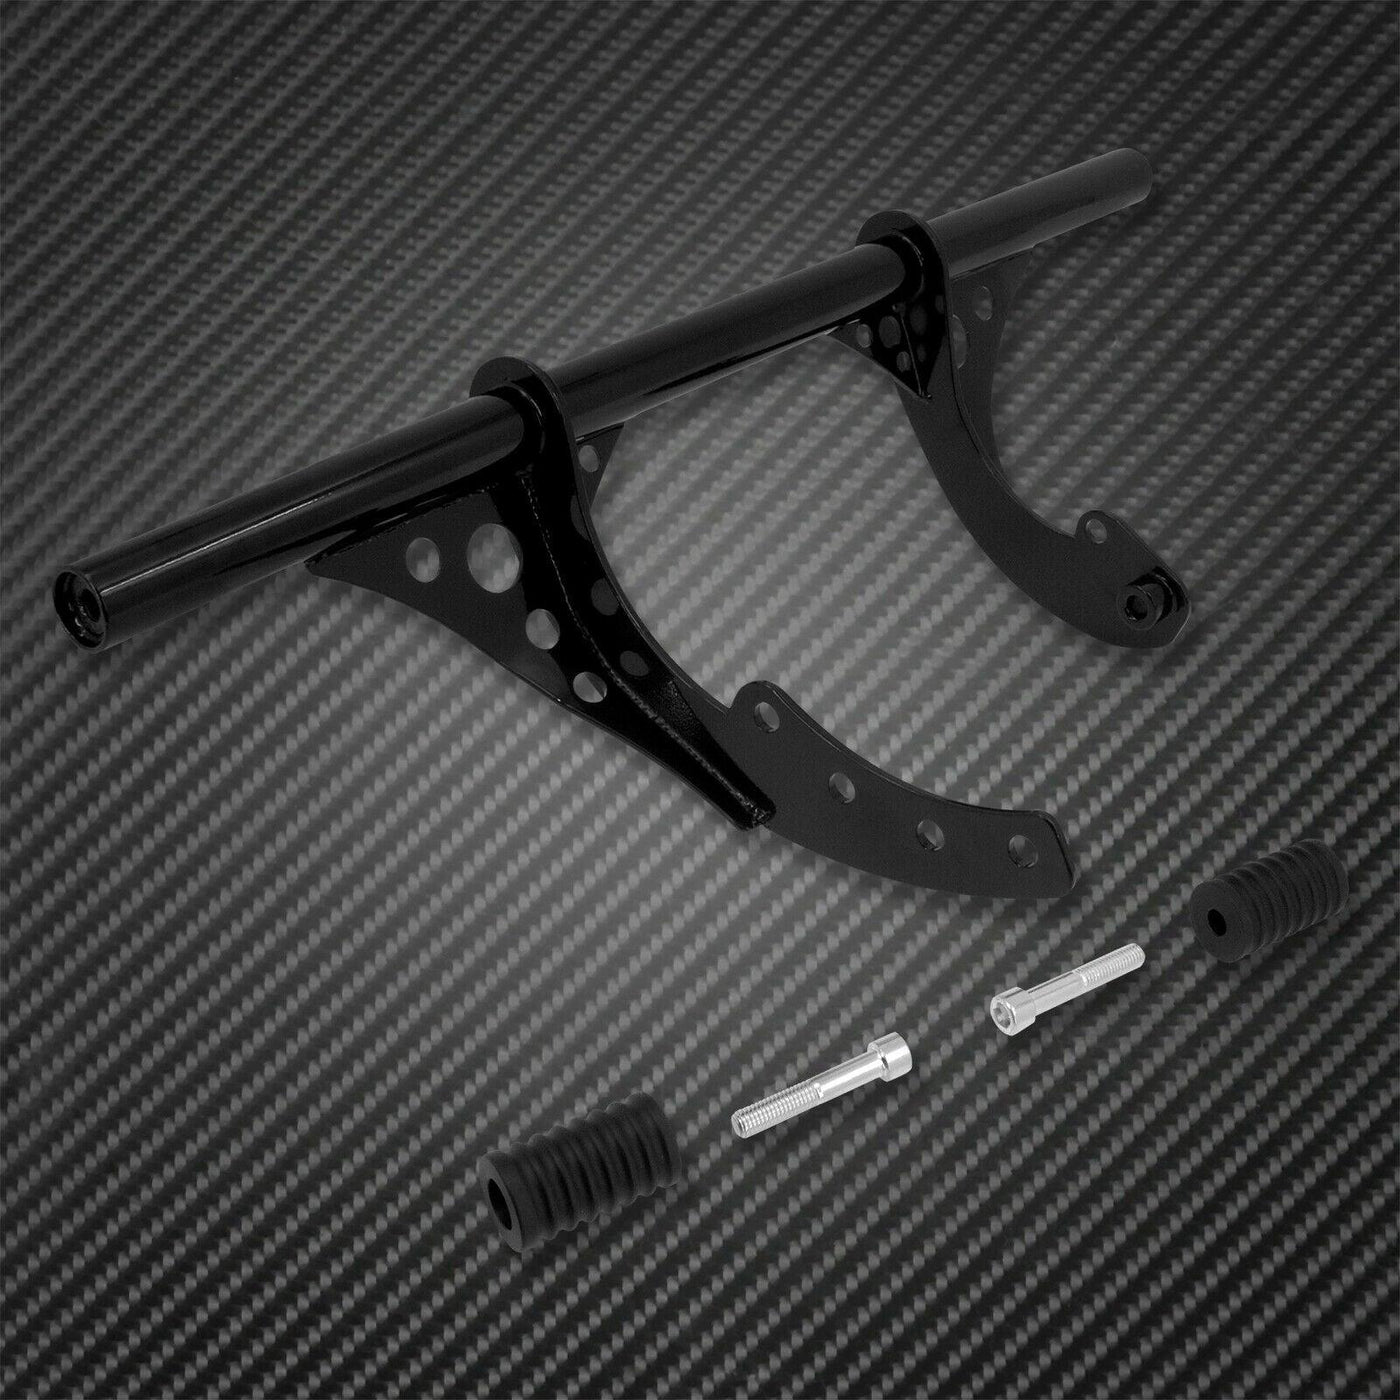 Front Highway Engine Guard Crash Bar Fit For Harley Softail FXLR FXBB 2018-2021 - Moto Life Products